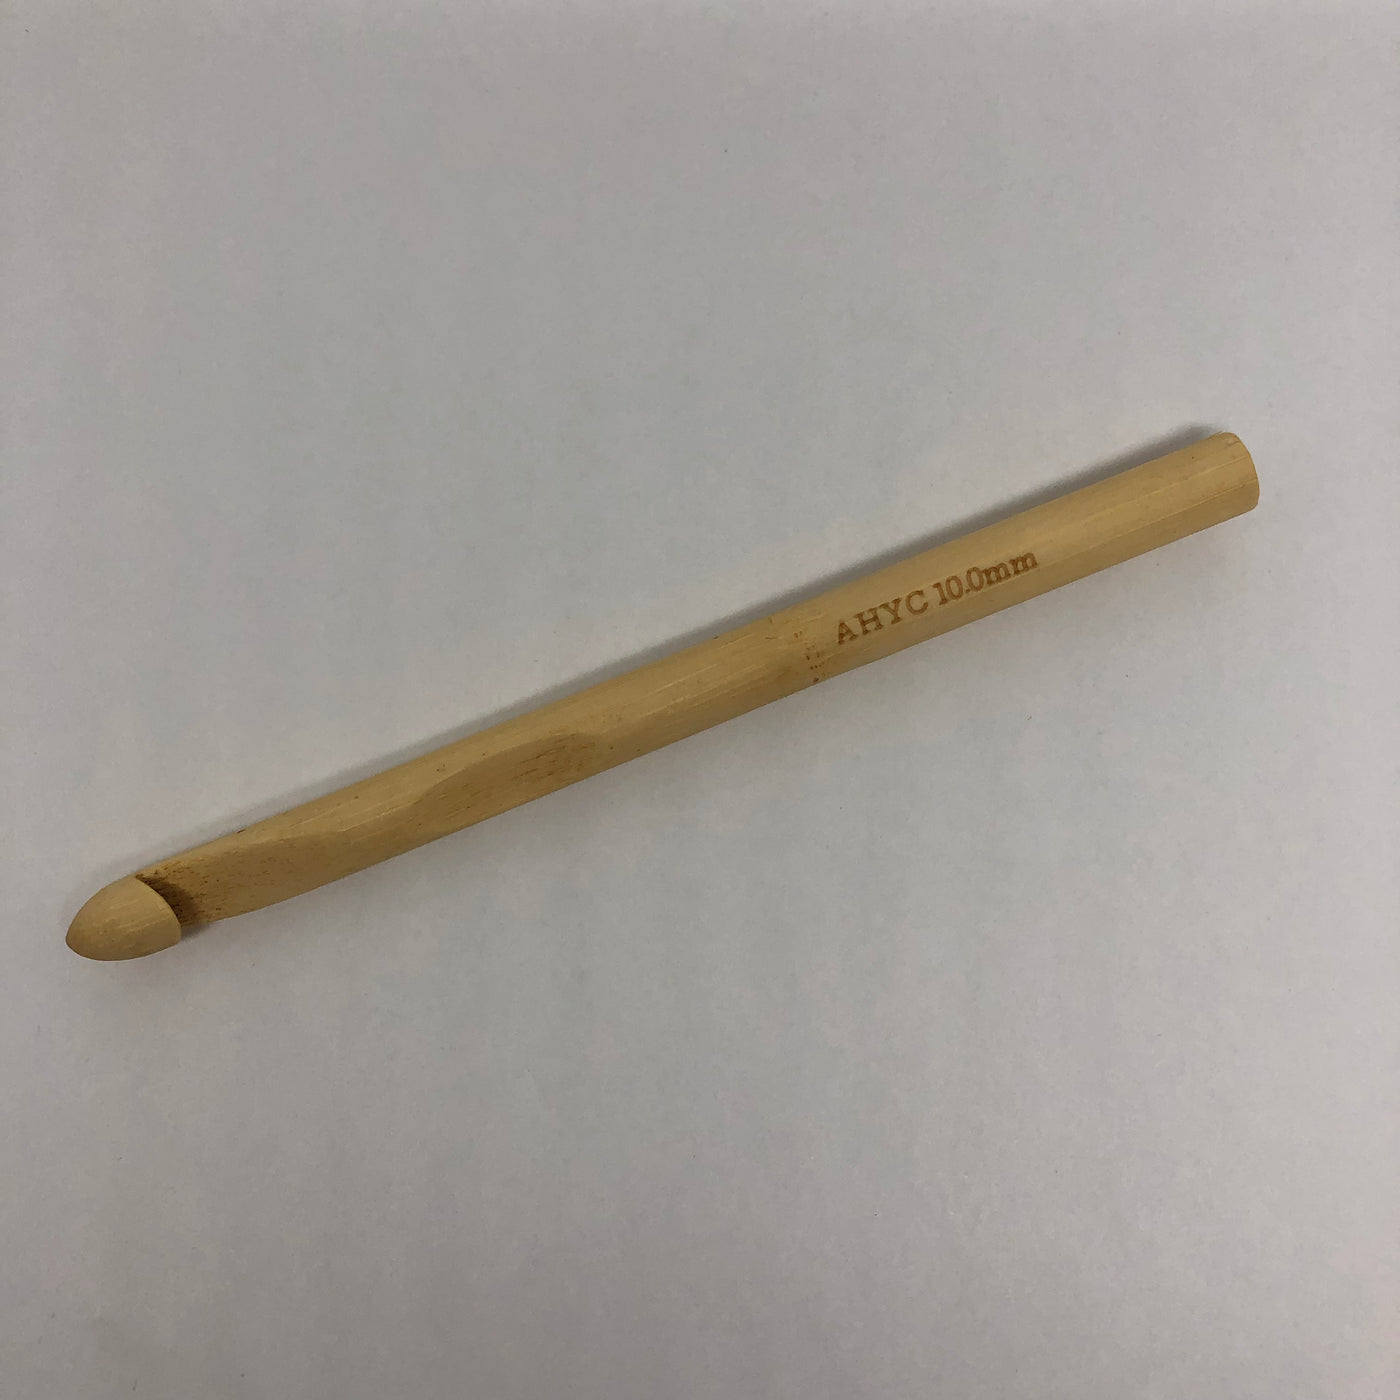 Where can I find bamboo crochet hooks 10mm